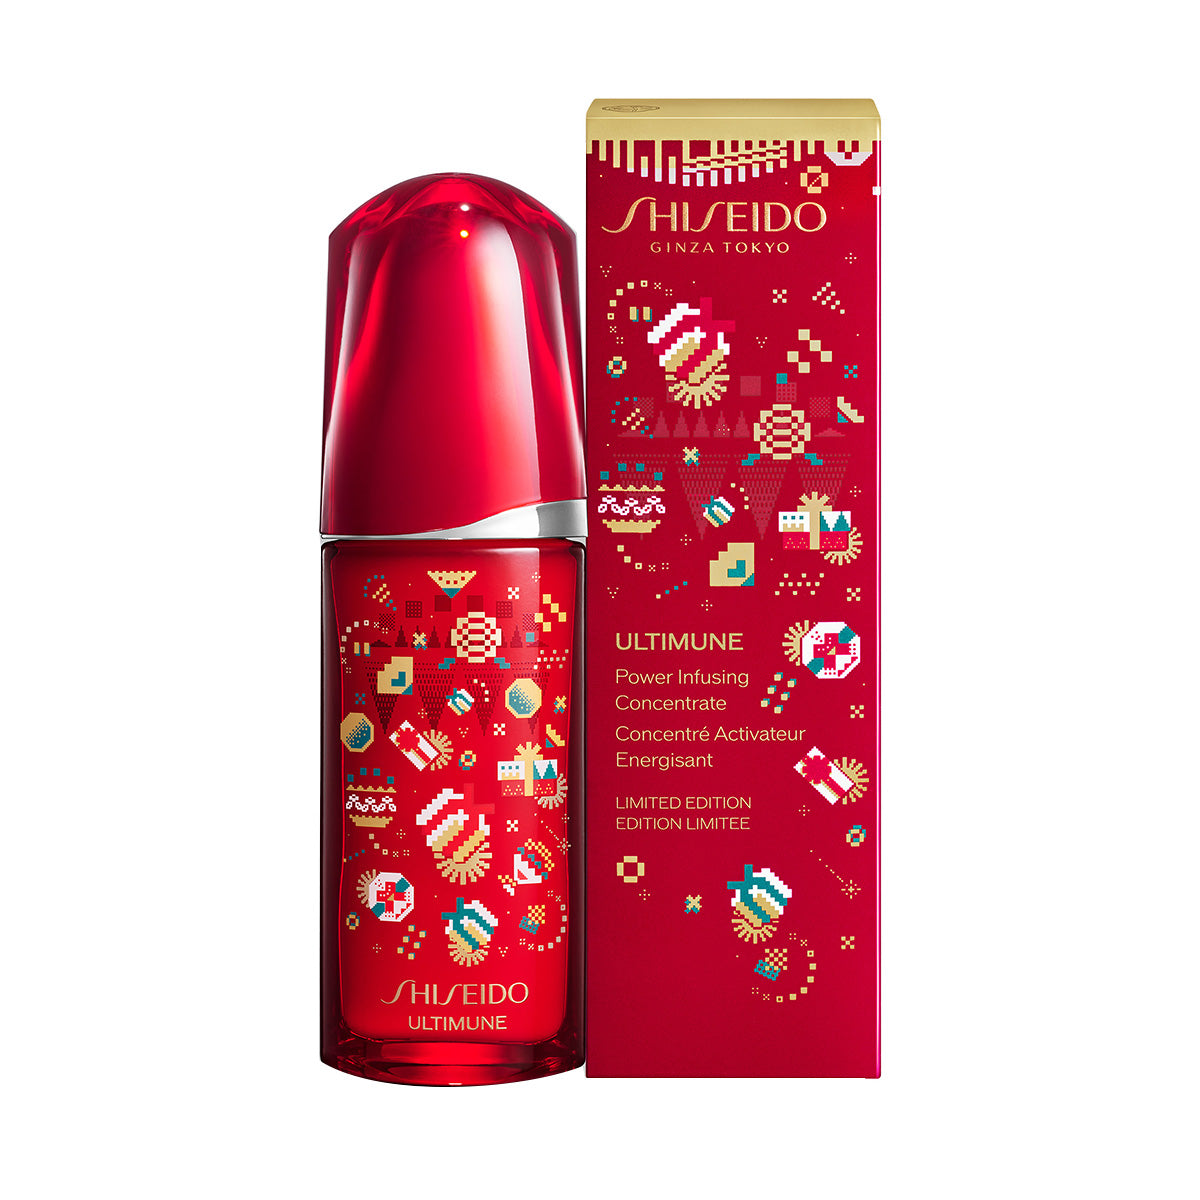 Shiseido Ultimune Power Infusing Concentrate 75ml (Holiday Limited Edition)